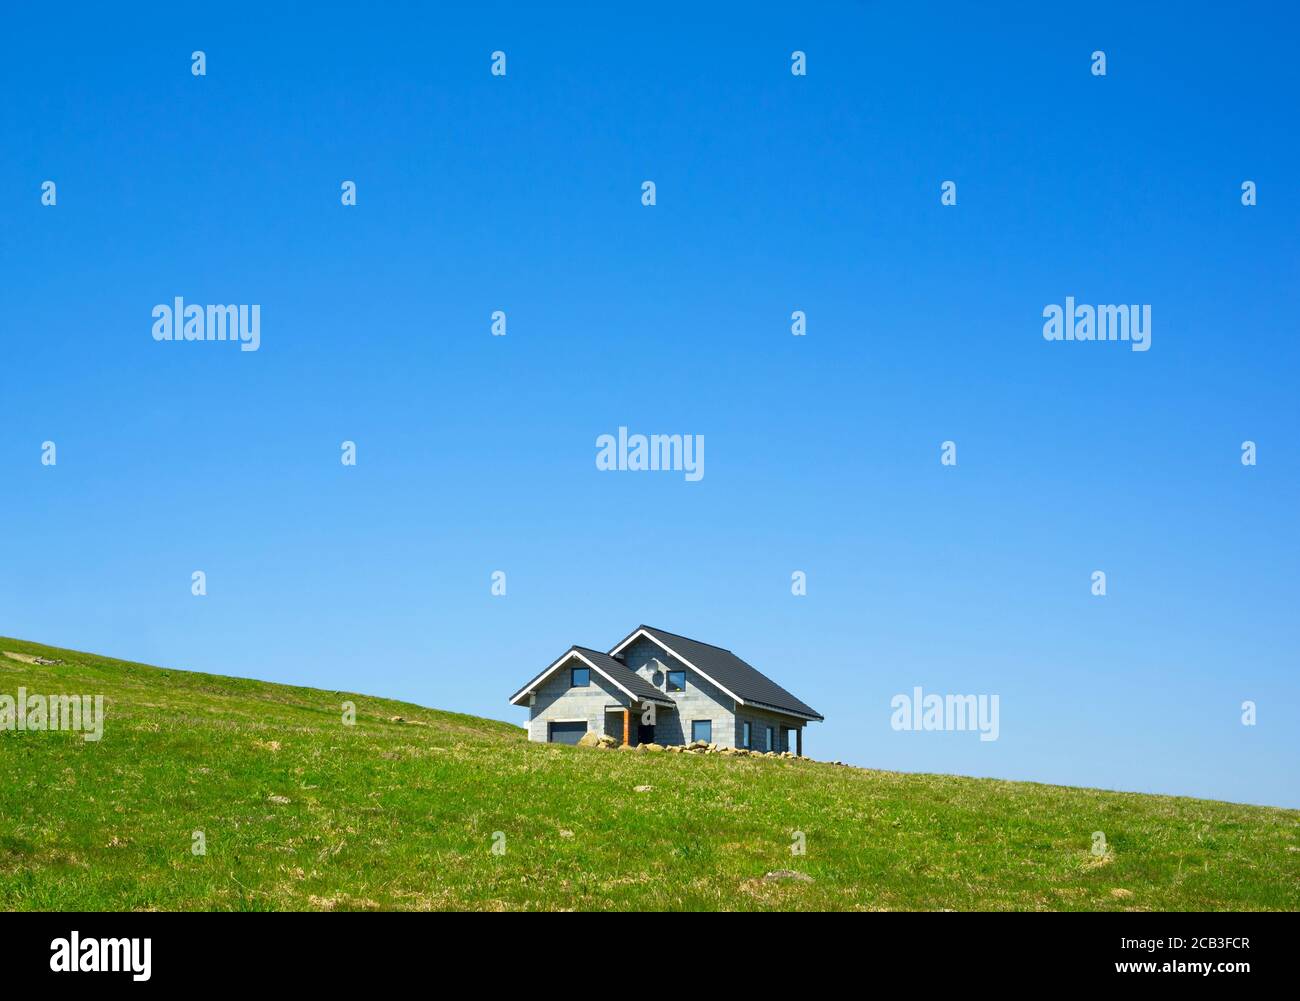 Construction and building of new residential house. Property is unfinished yet - unplastered walls with visible bricks. Hillside and empty meadow and Stock Photo